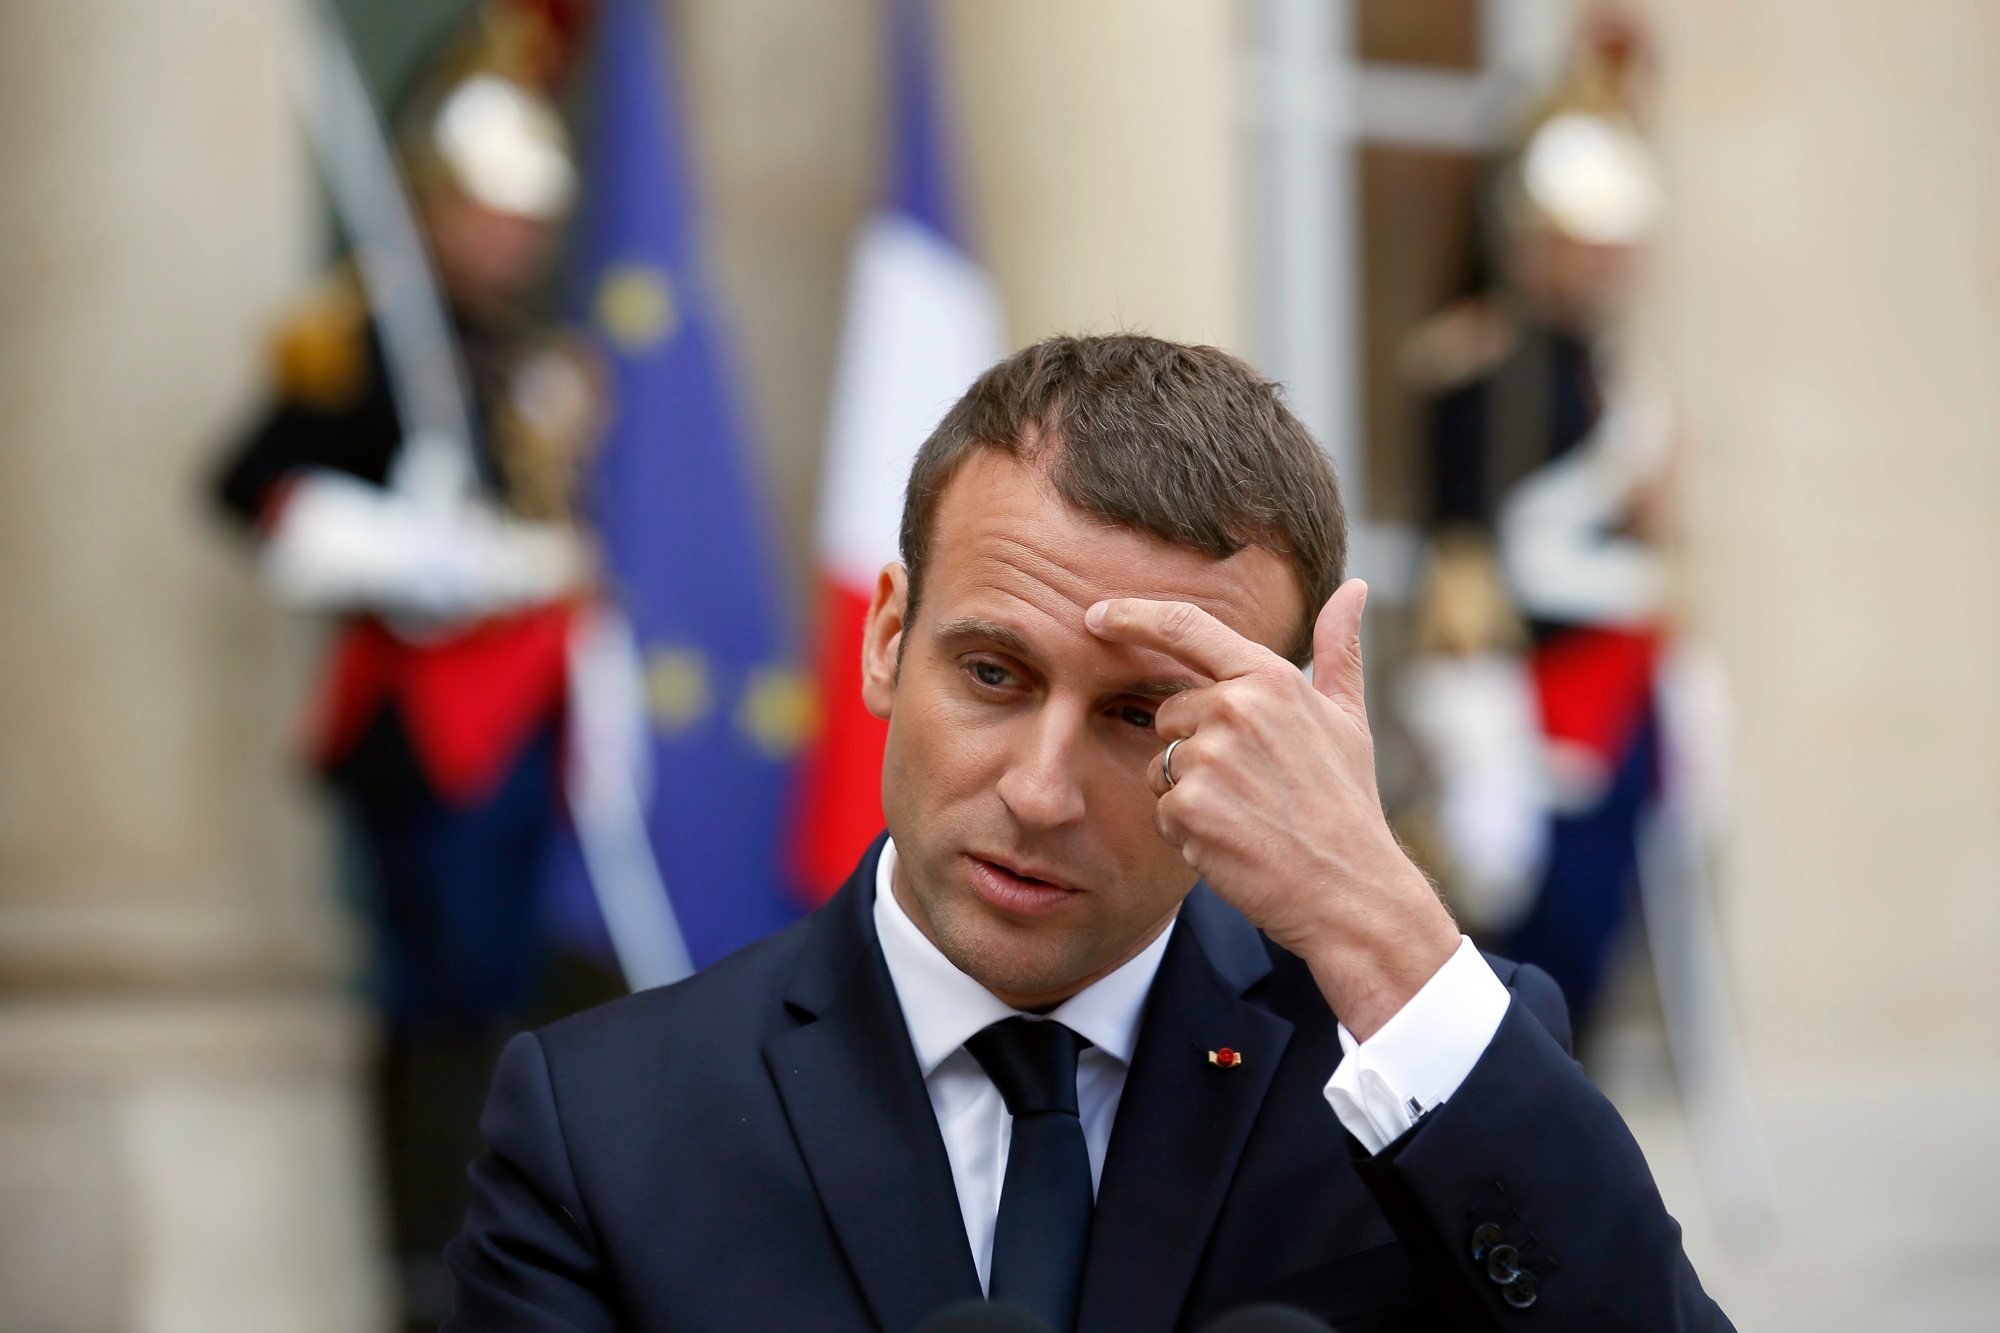 French President Emmanuel Macron gestures during a joint press conference with Dutch Prime Minister Mark Rutte after their meeting at the Elysee Palace in Paris, France, Friday, June 16, 2017. French president Emmanuel Macron is holding a series of meetings with European leaders in Paris, as Brexit negotiations are due to start next week. (AP Photo/Francois Mori) France Netherlands